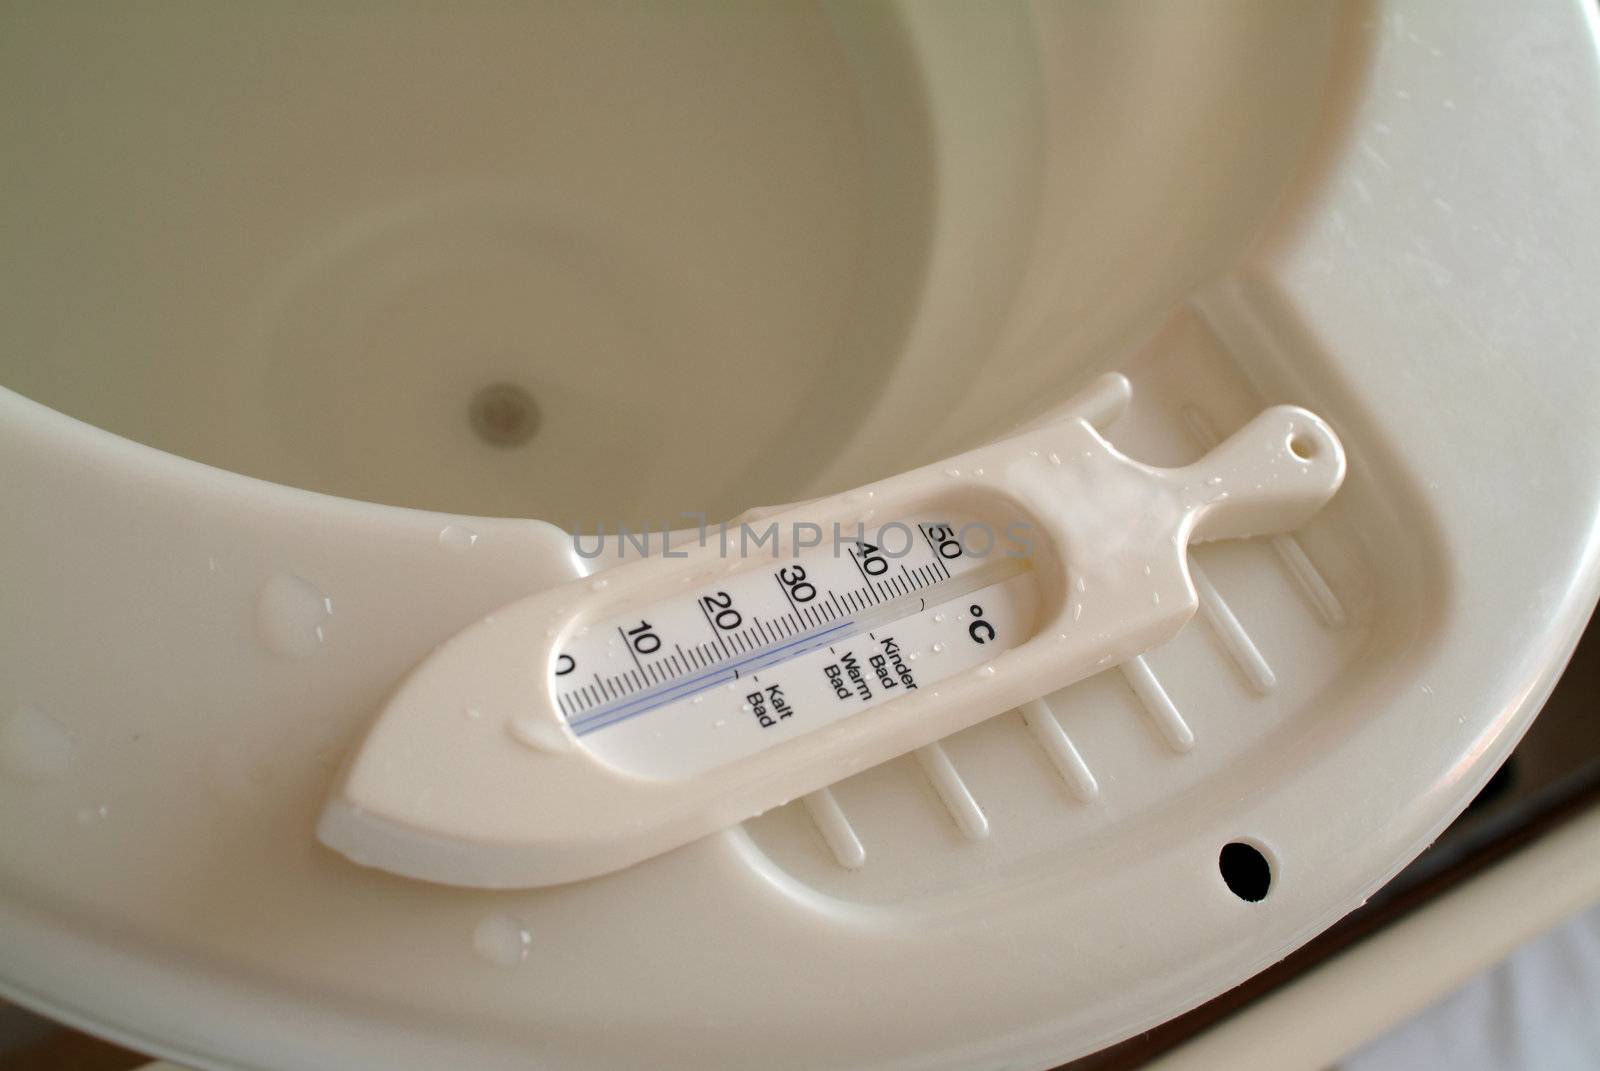 Thermometer on the rim of a baby bath tub